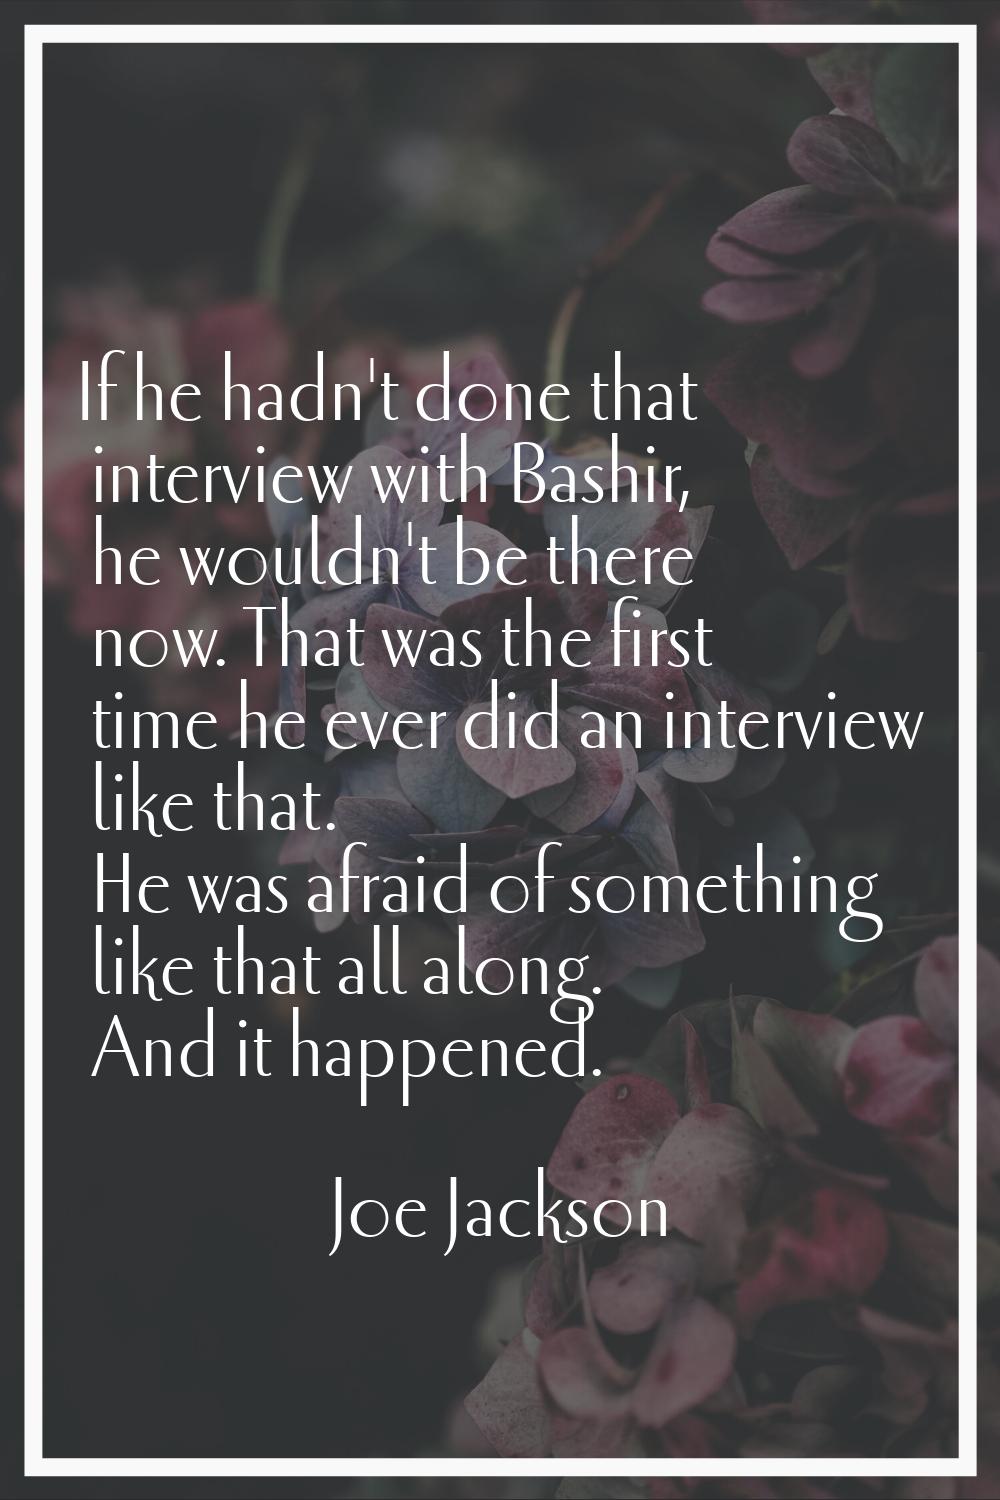 If he hadn't done that interview with Bashir, he wouldn't be there now. That was the first time he 